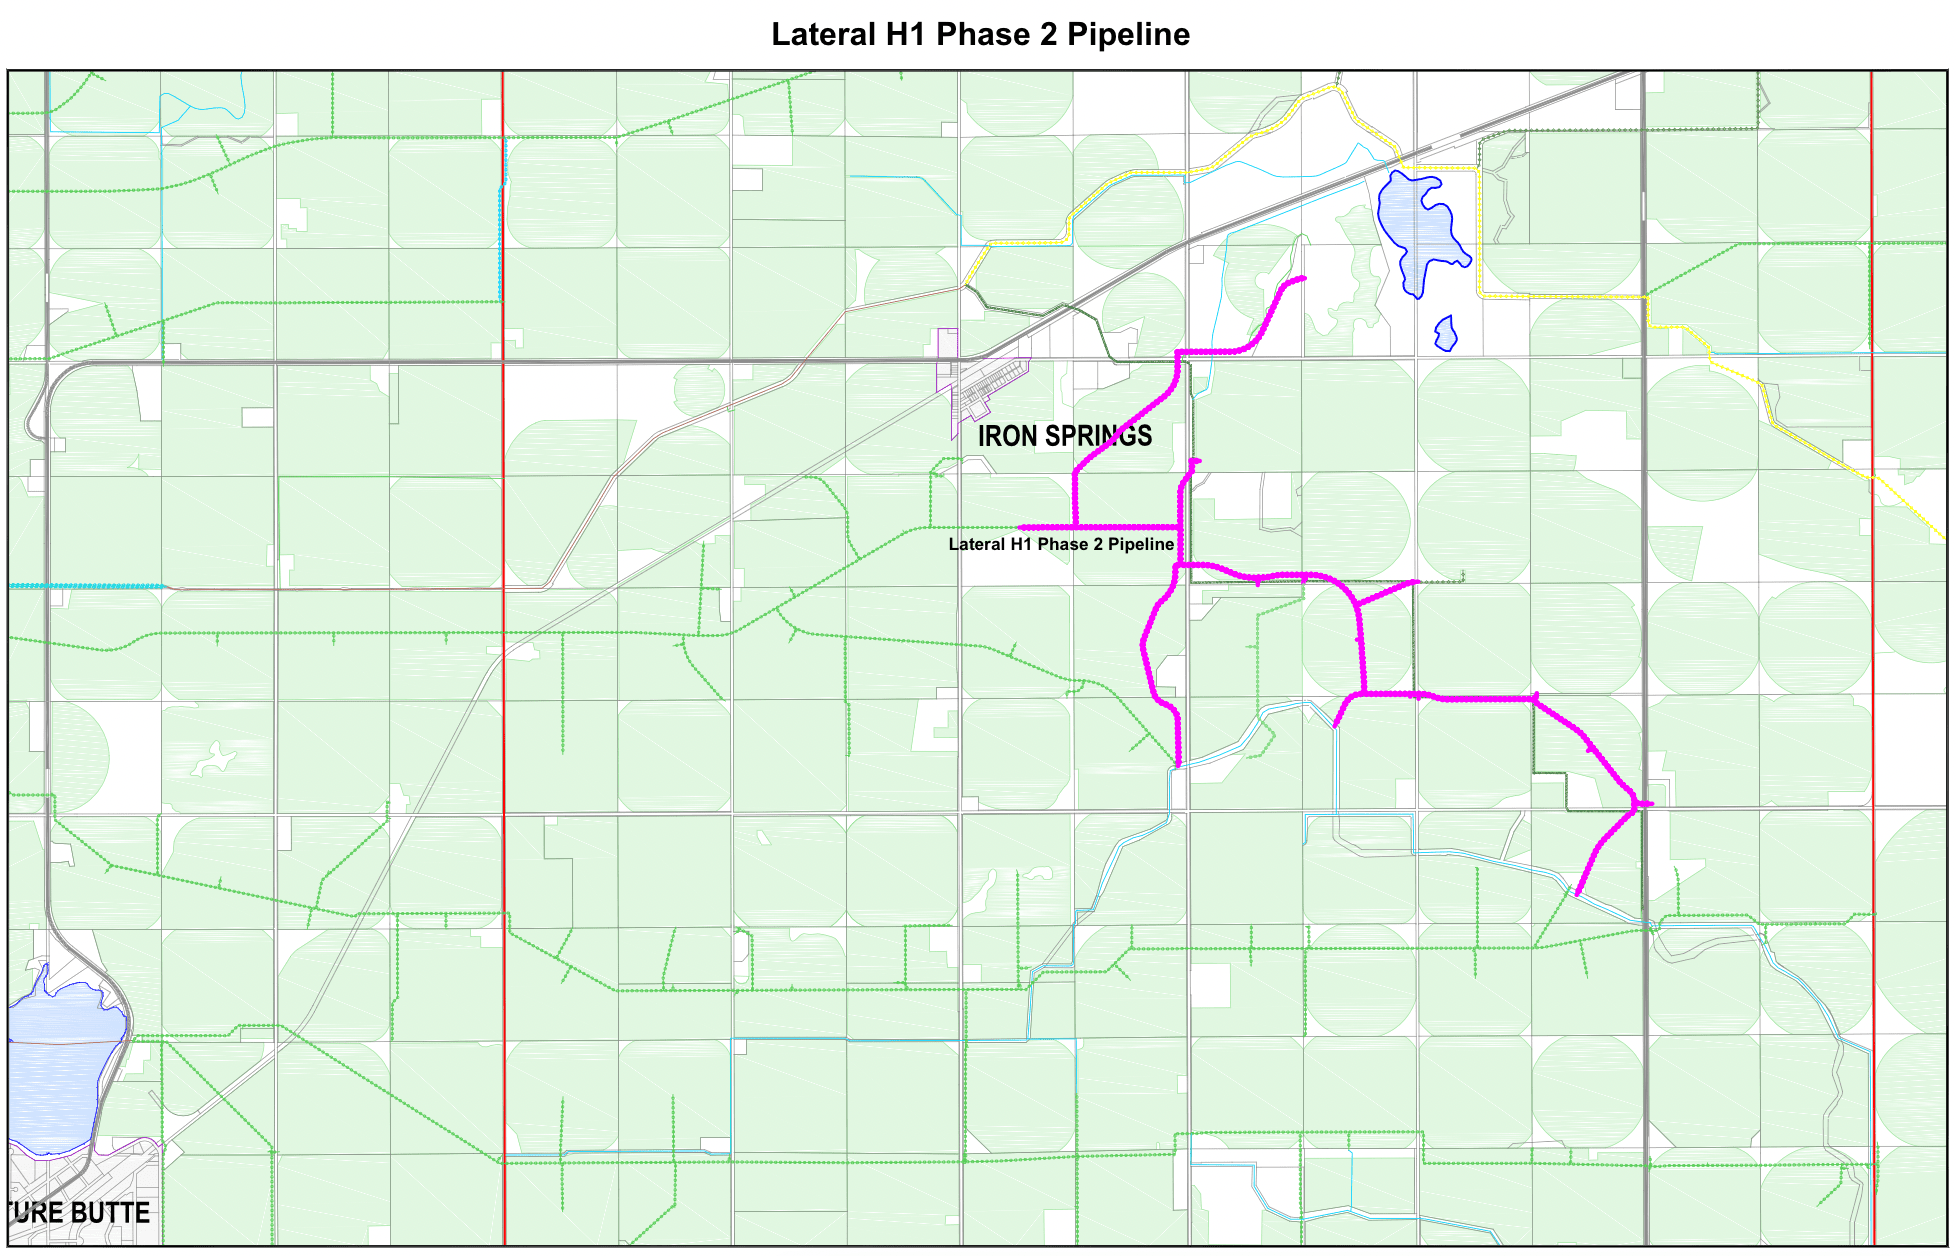 LateralH1Phase2